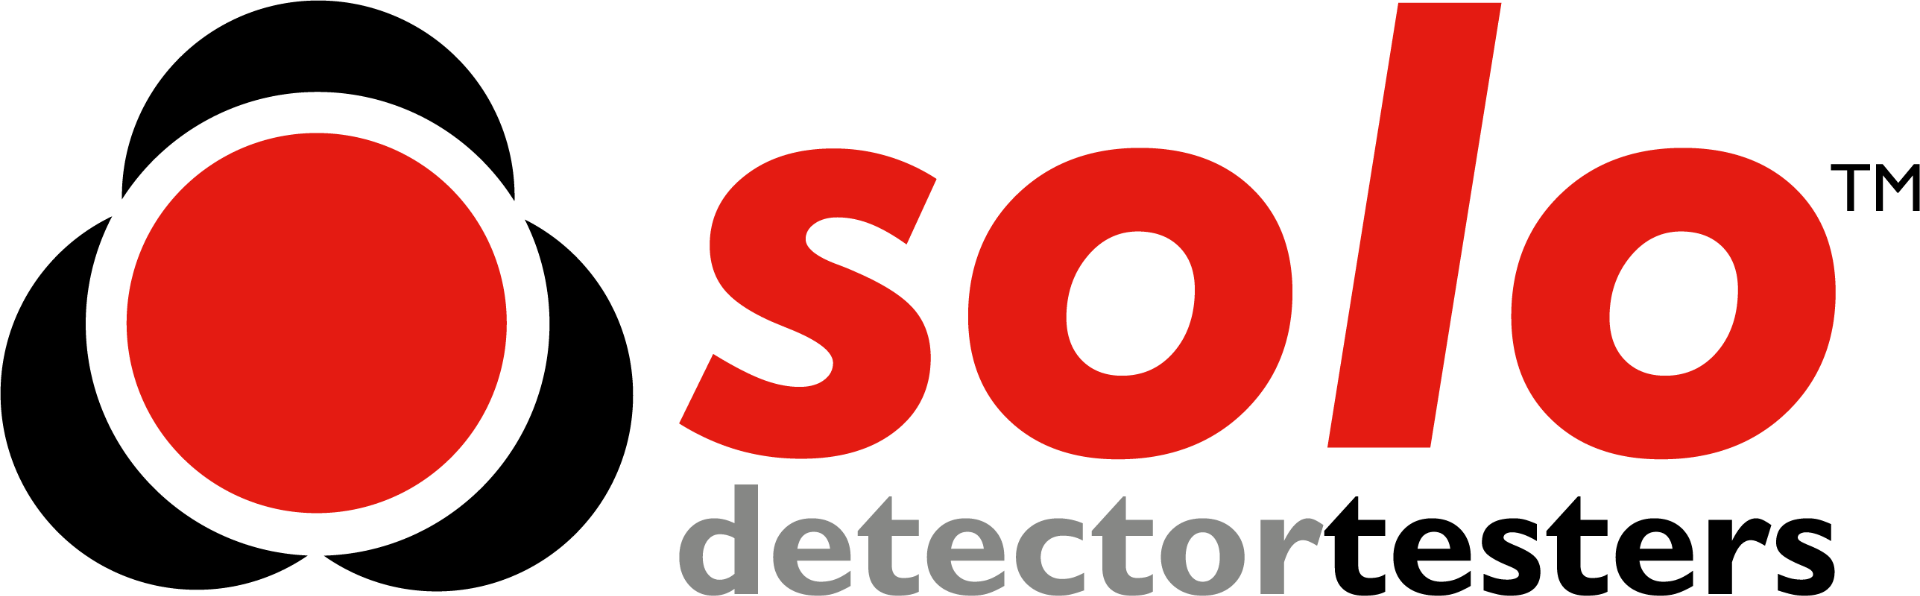 Solo_logo.png